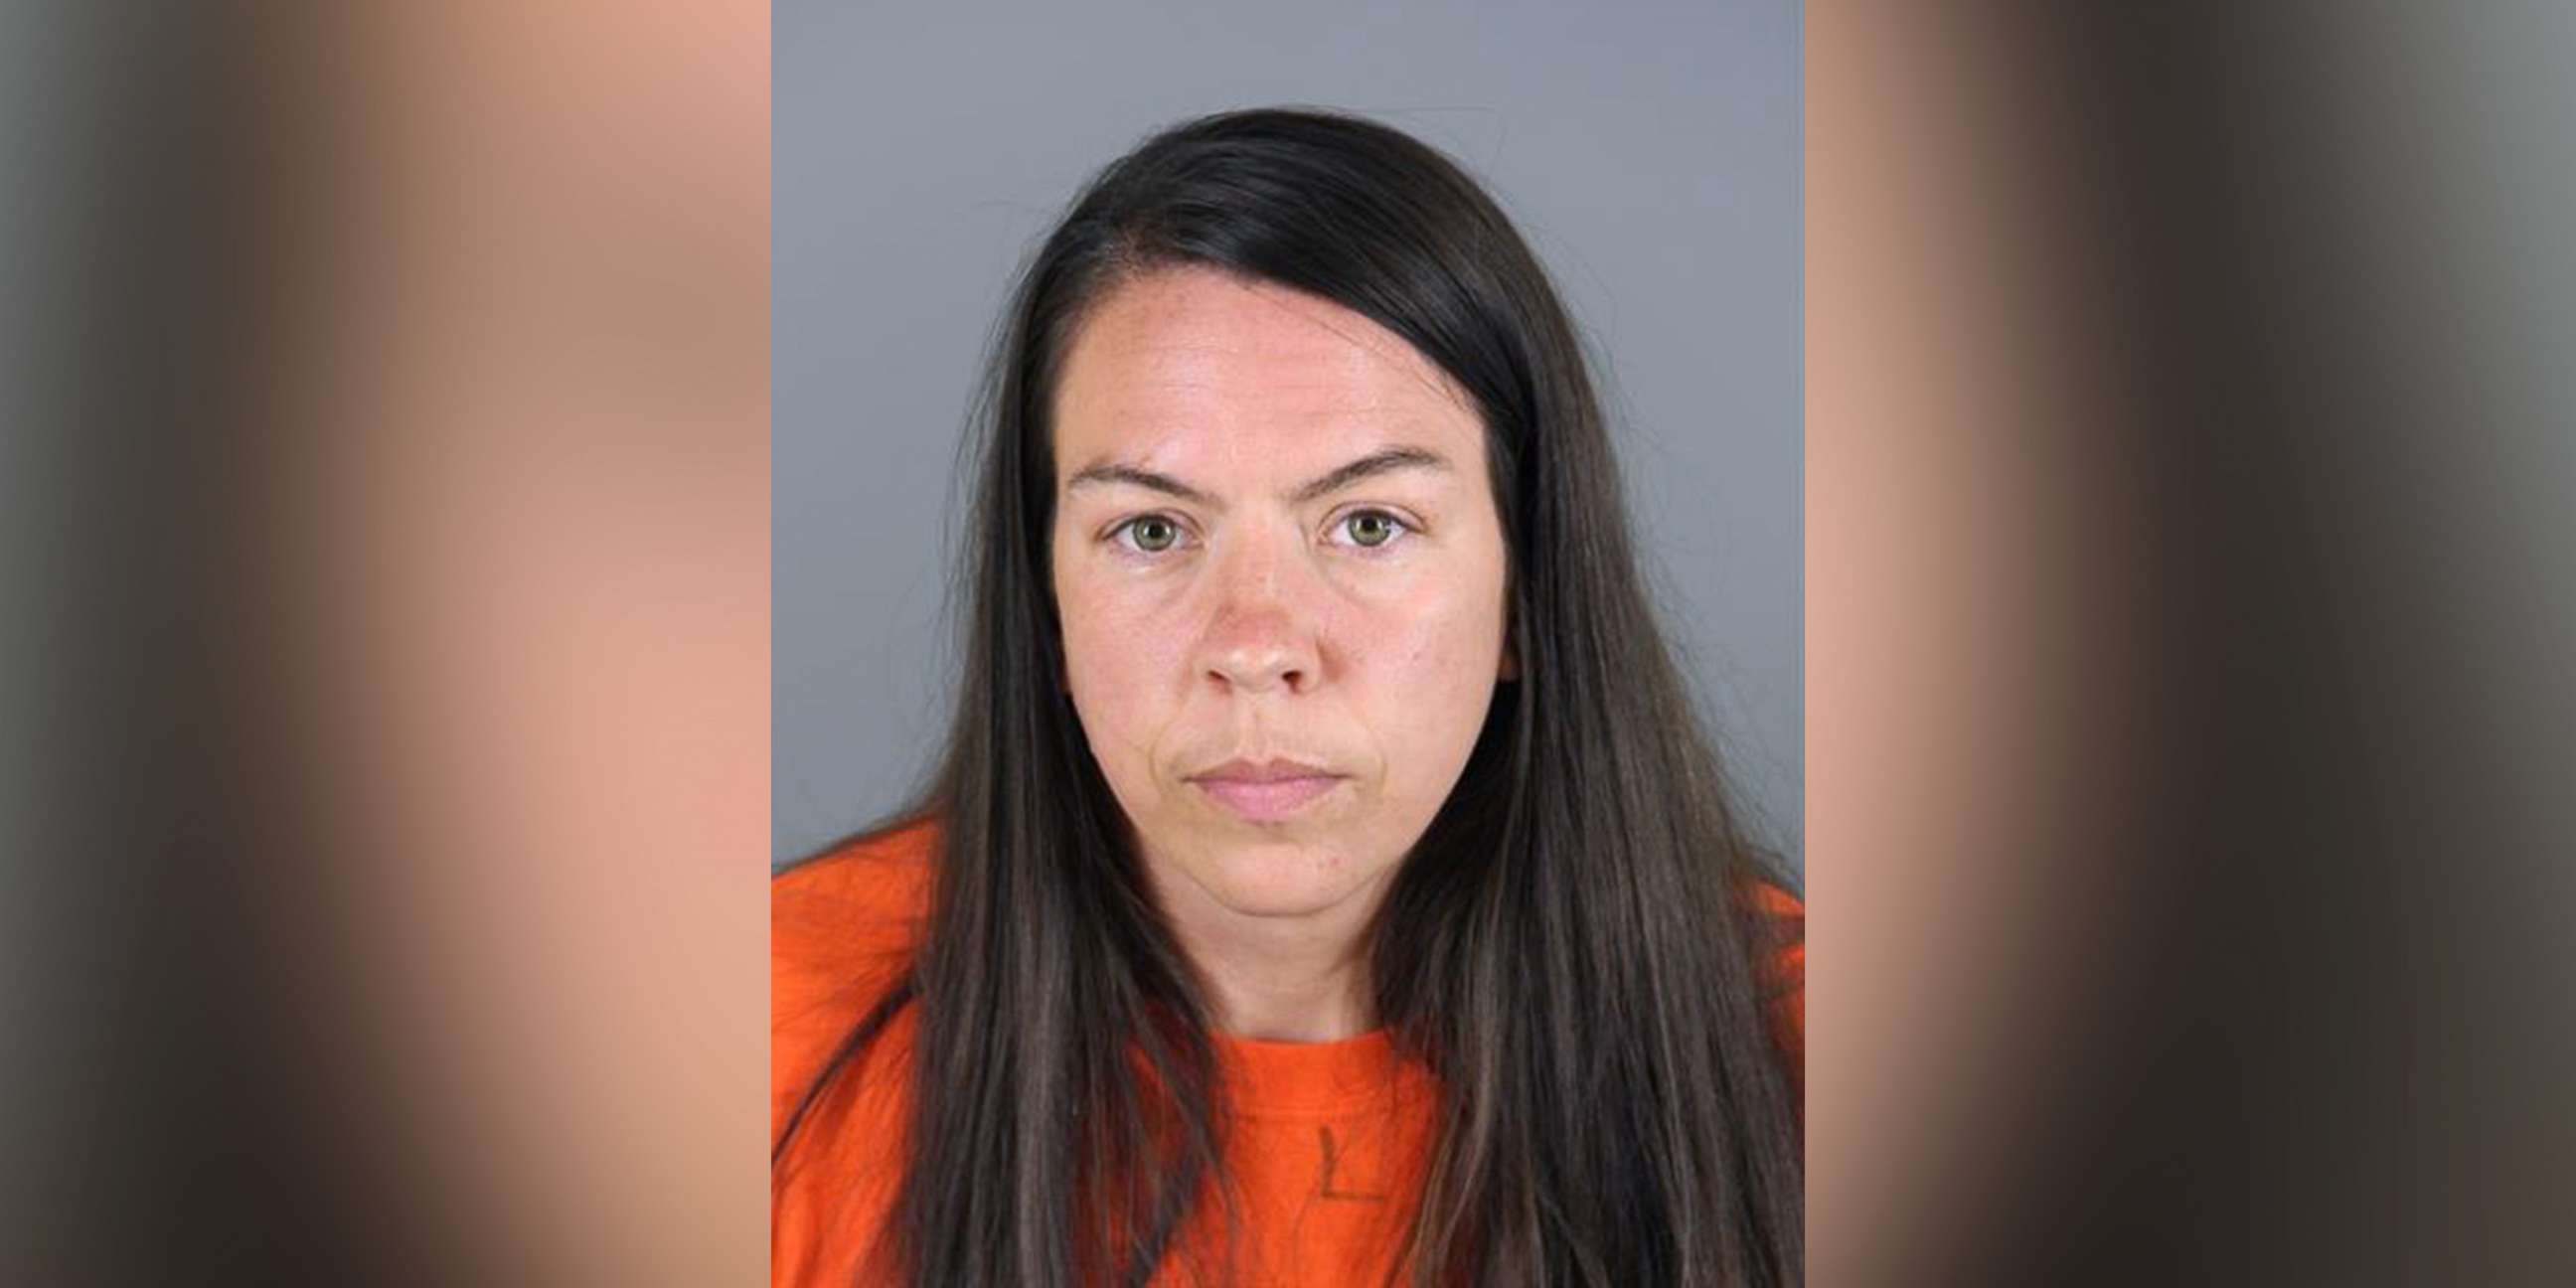 Wisconsin woman arrested, accused of murdering friend with eye drops pic pic